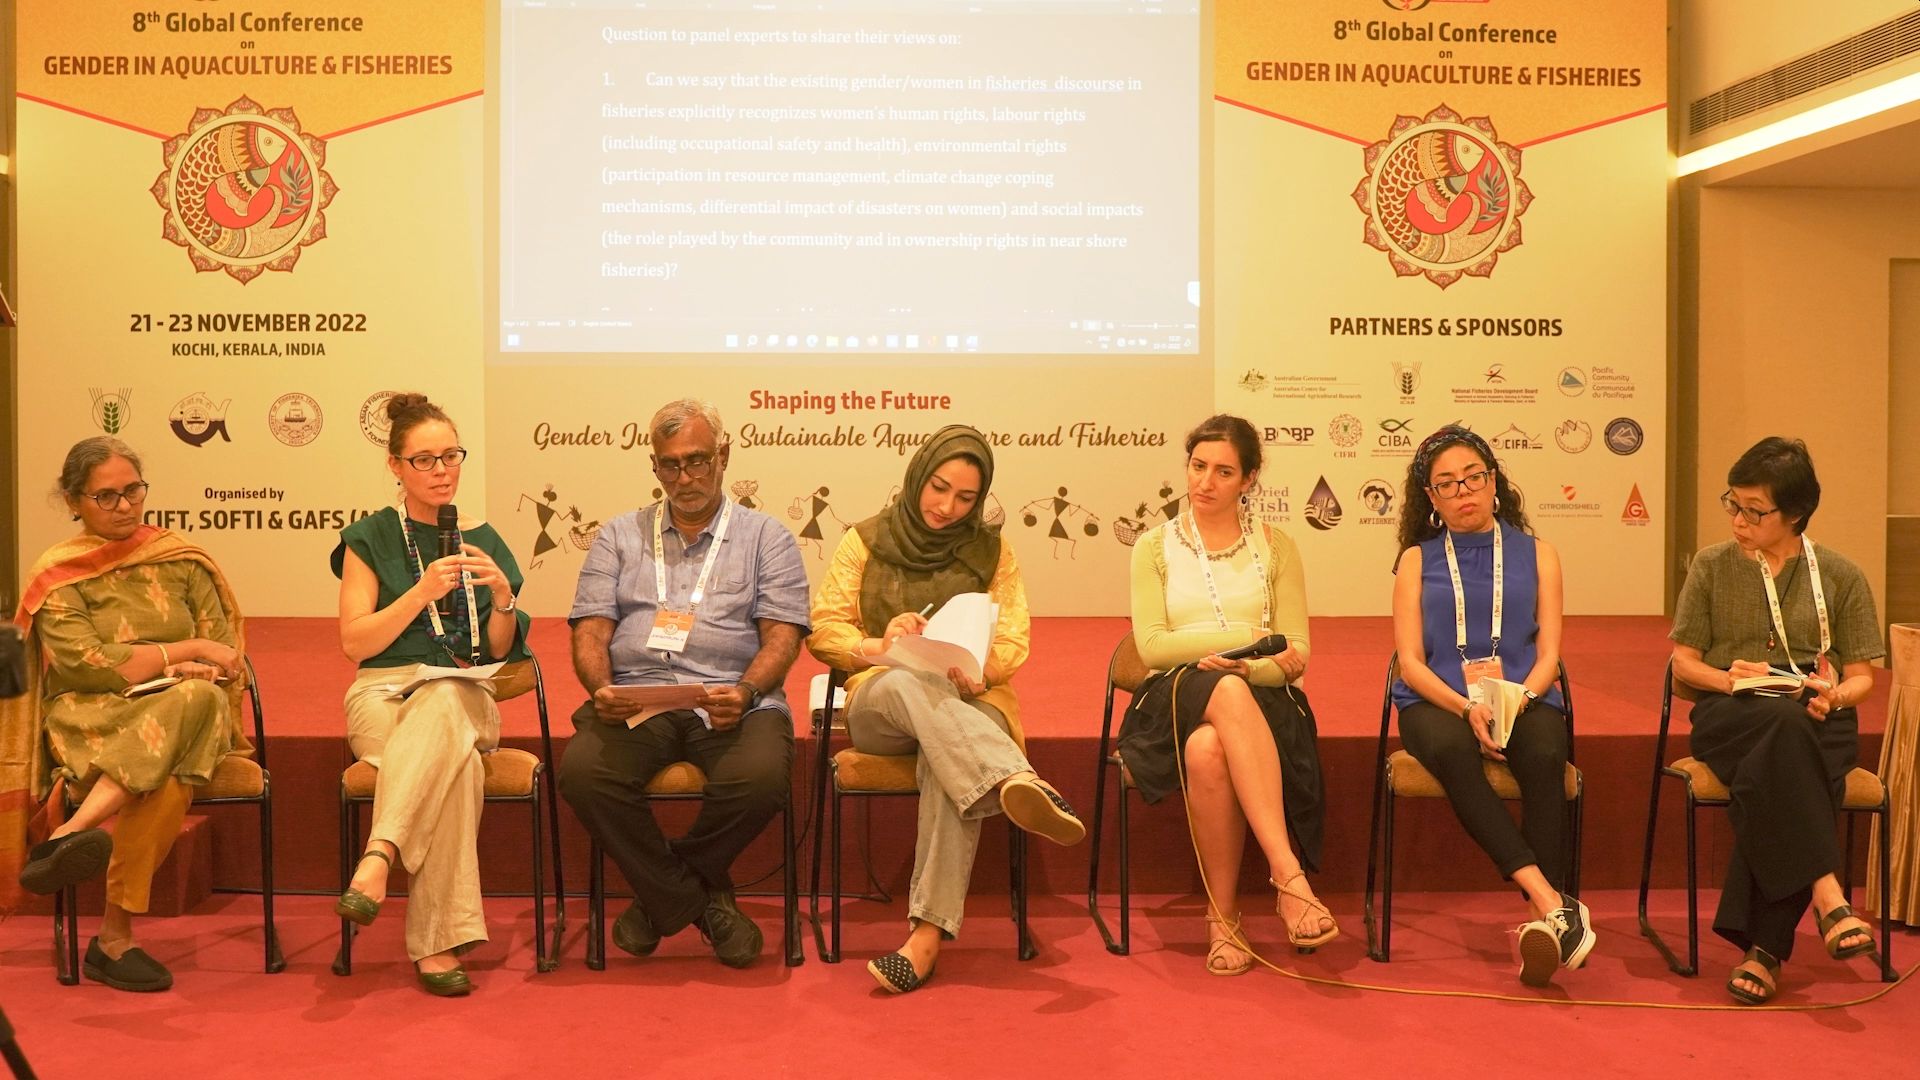 GAF8 Special Session 7: Shared Experiences of Women in Fisheries by ICSF